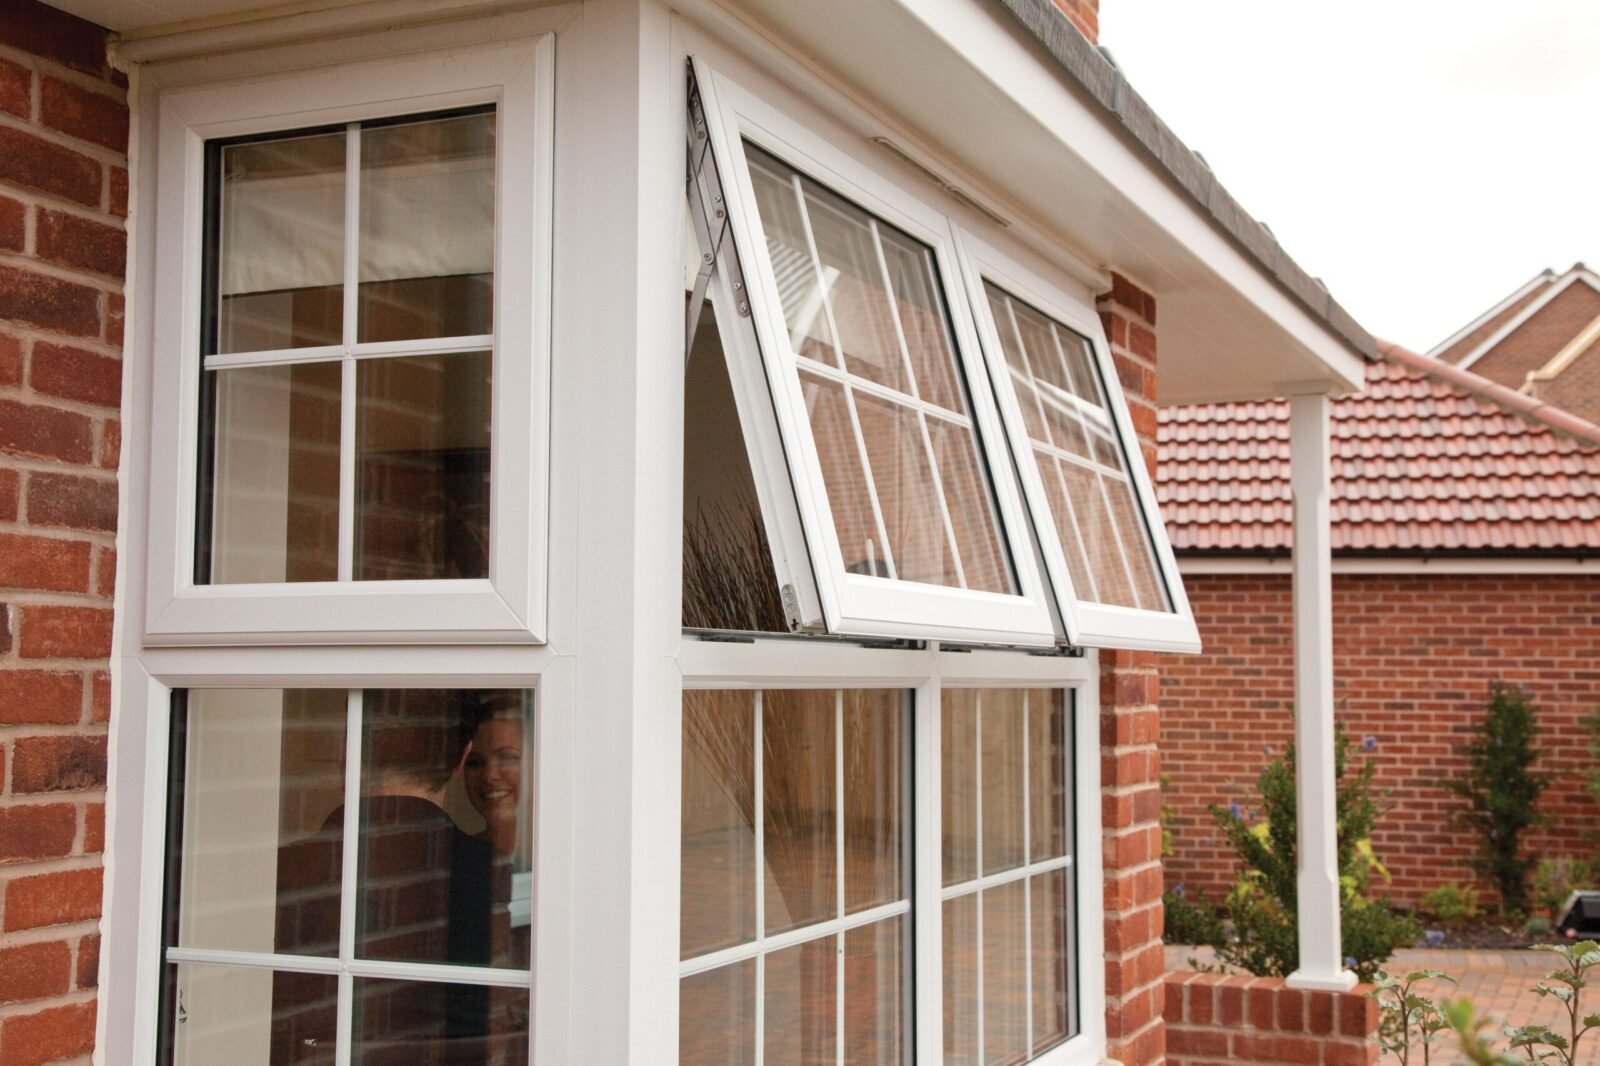 7 Steps To Maintain Your Double Glazing Windows And Doors